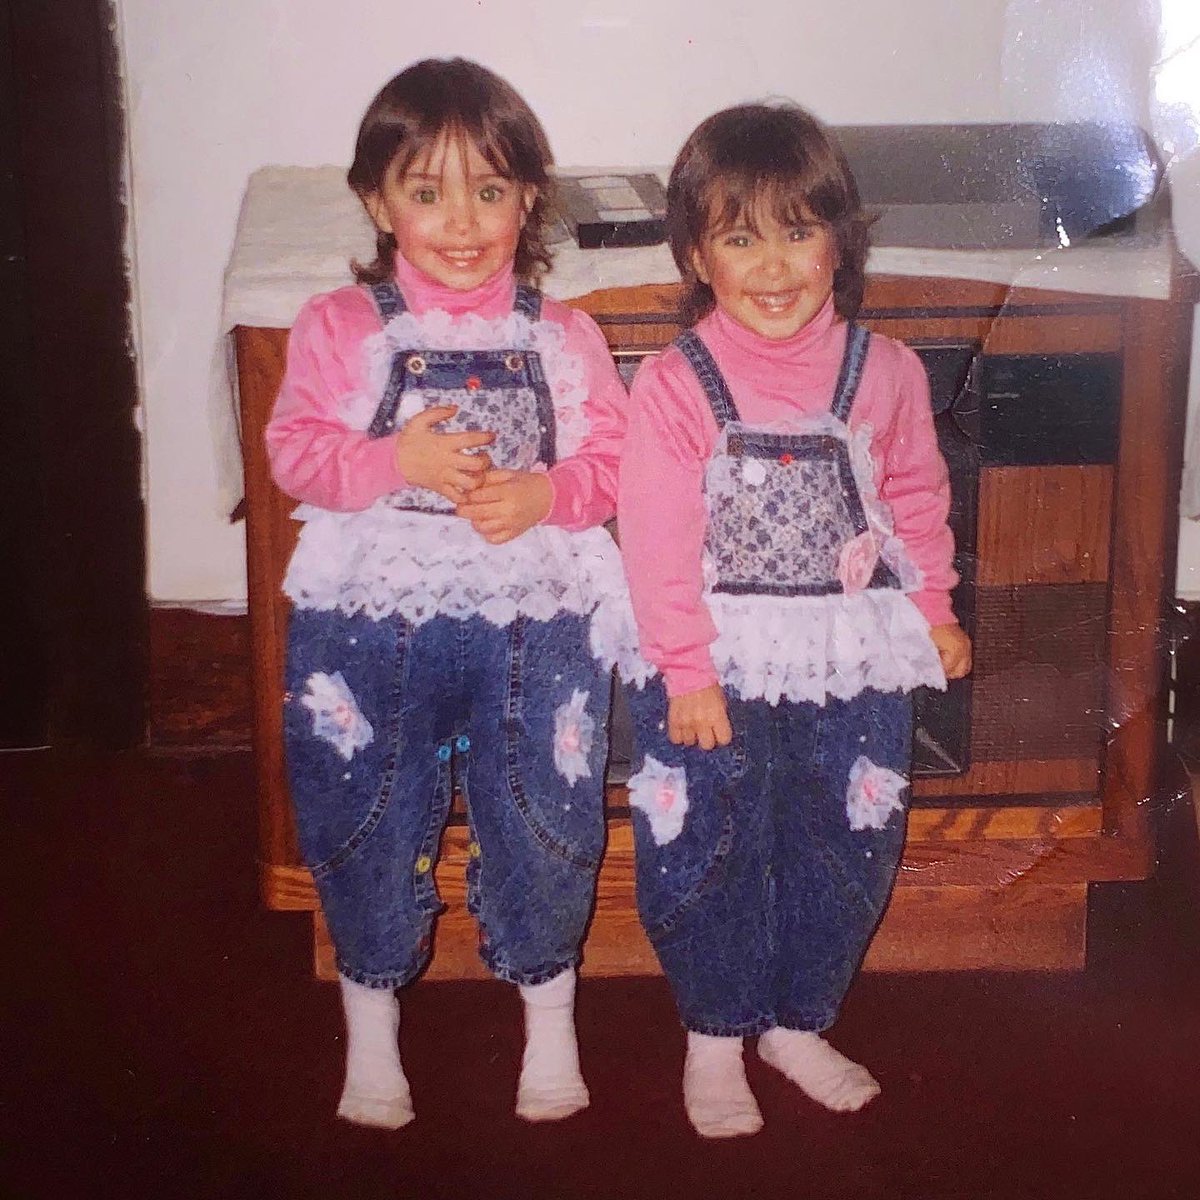 Ig Hollyyako On Twitter Happy Birthday To Us Doesn T Get Any Better Than Blushed Cheeks Mullet Demi Moore Haircuts Sassy Overalls And Our Own House Party Love You Heatheryako Https T Co Xve6iyylem